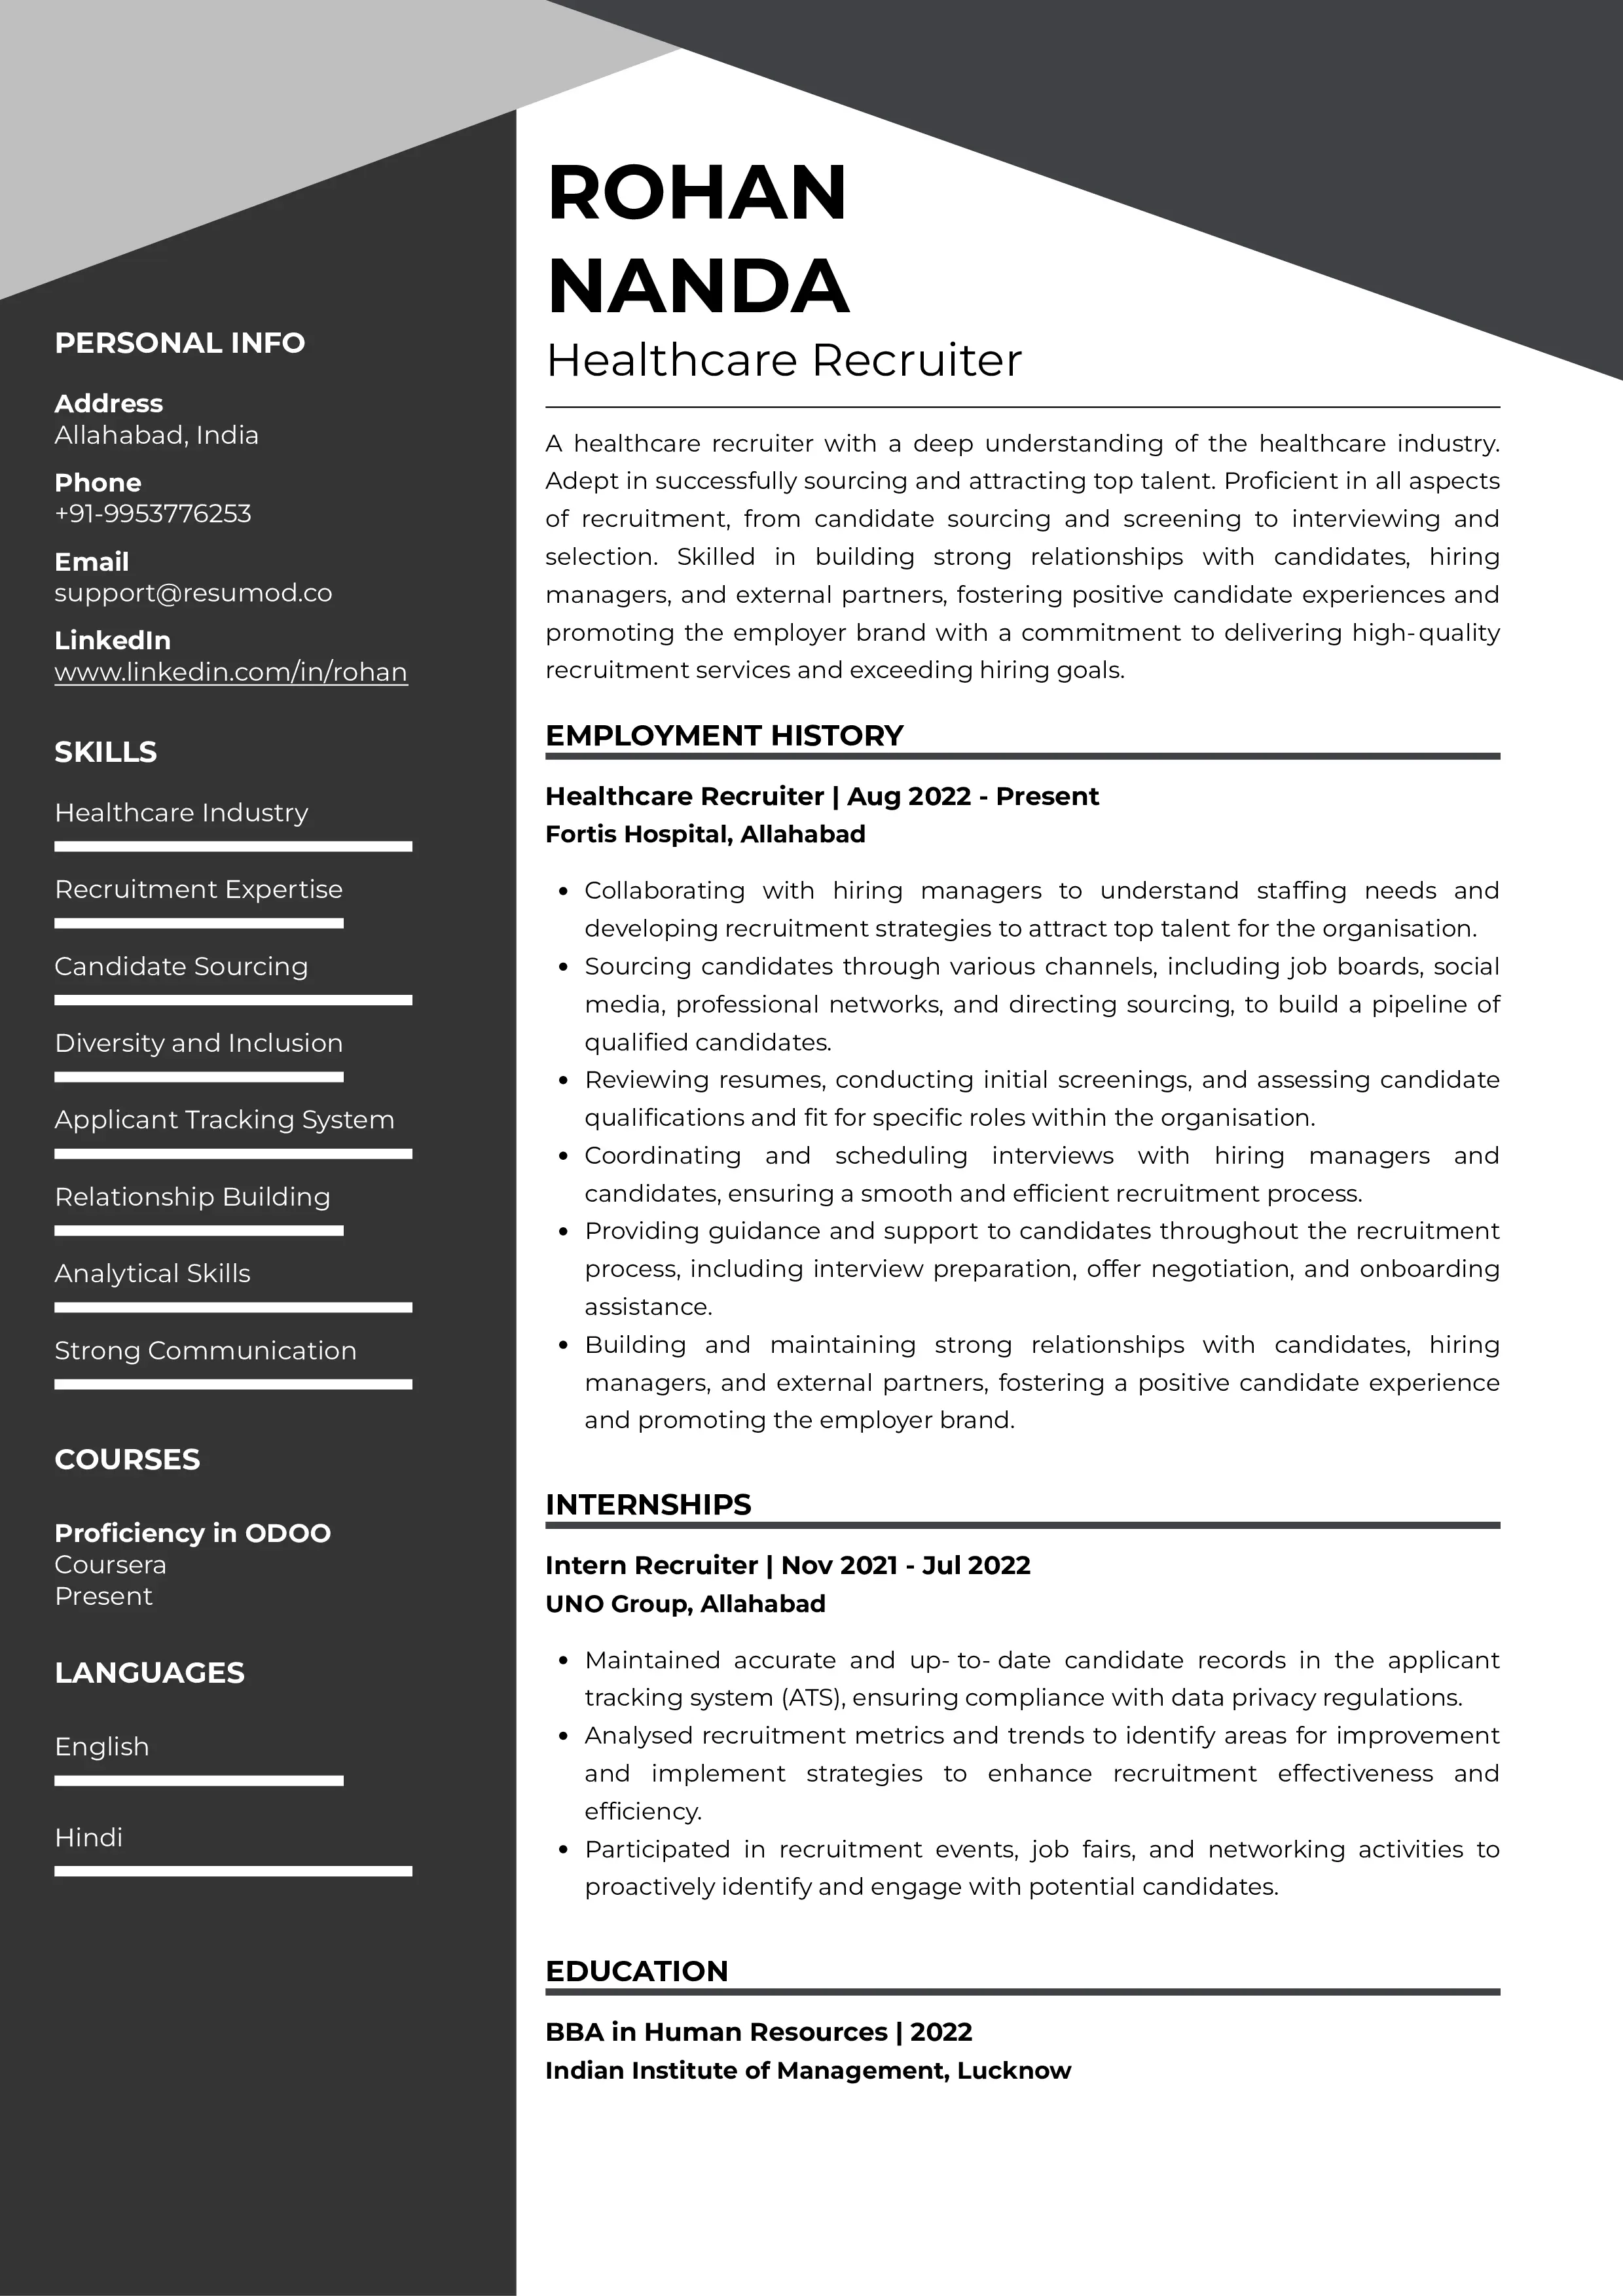 Sample Resume of Healthcare Recruiter | Free Resume Templates & Samples on Resumod.co